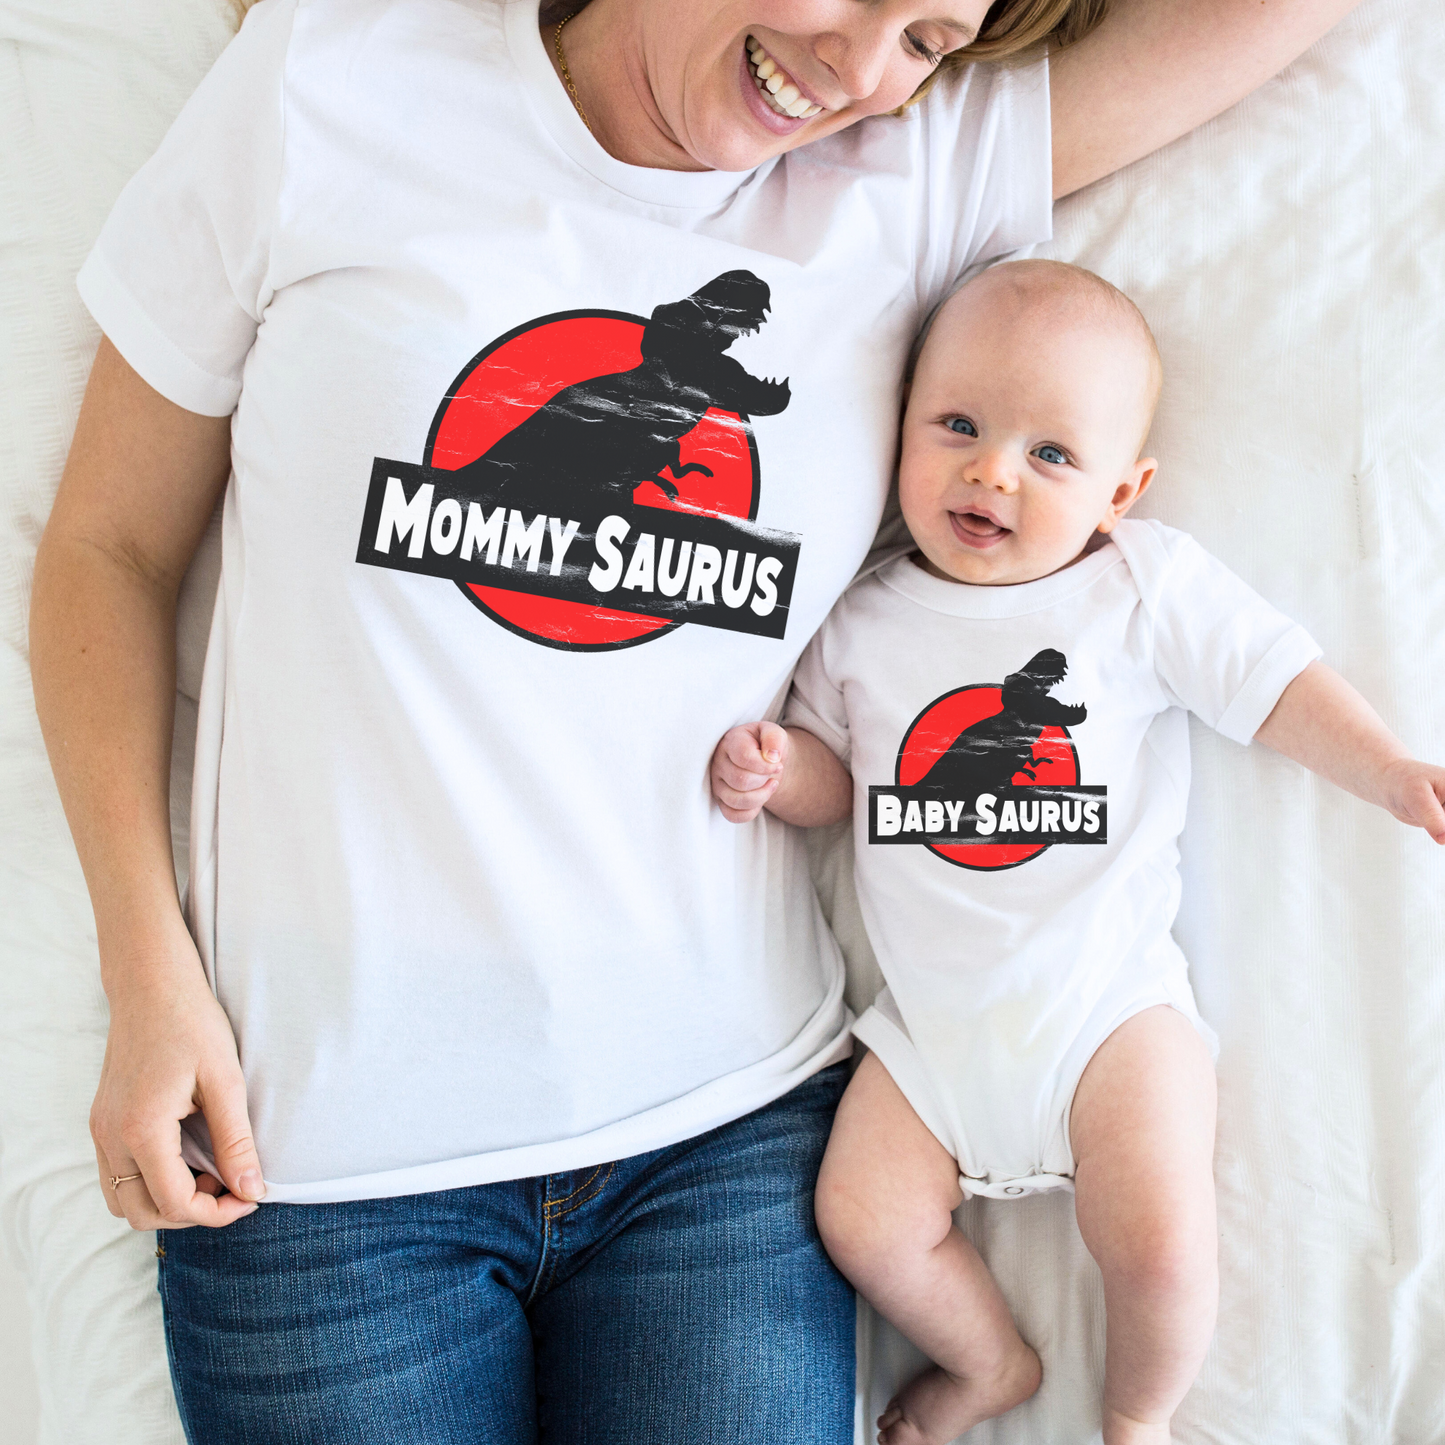 Mommy & Baby Saurus - Mommy and Me Outfits